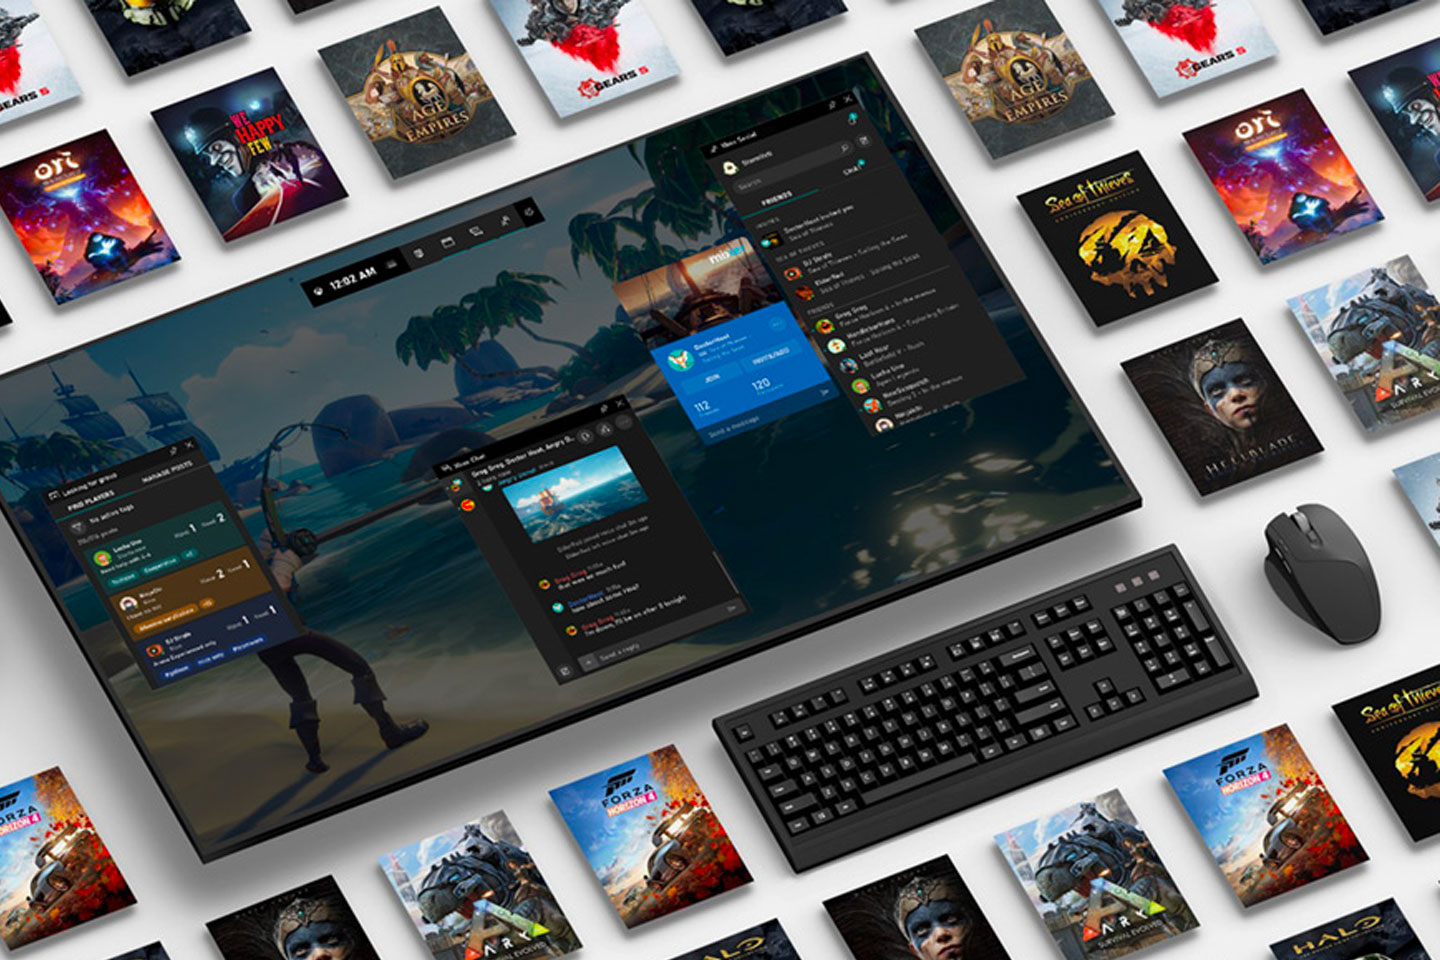 Screen, mouse and keyboard among tons of game titles